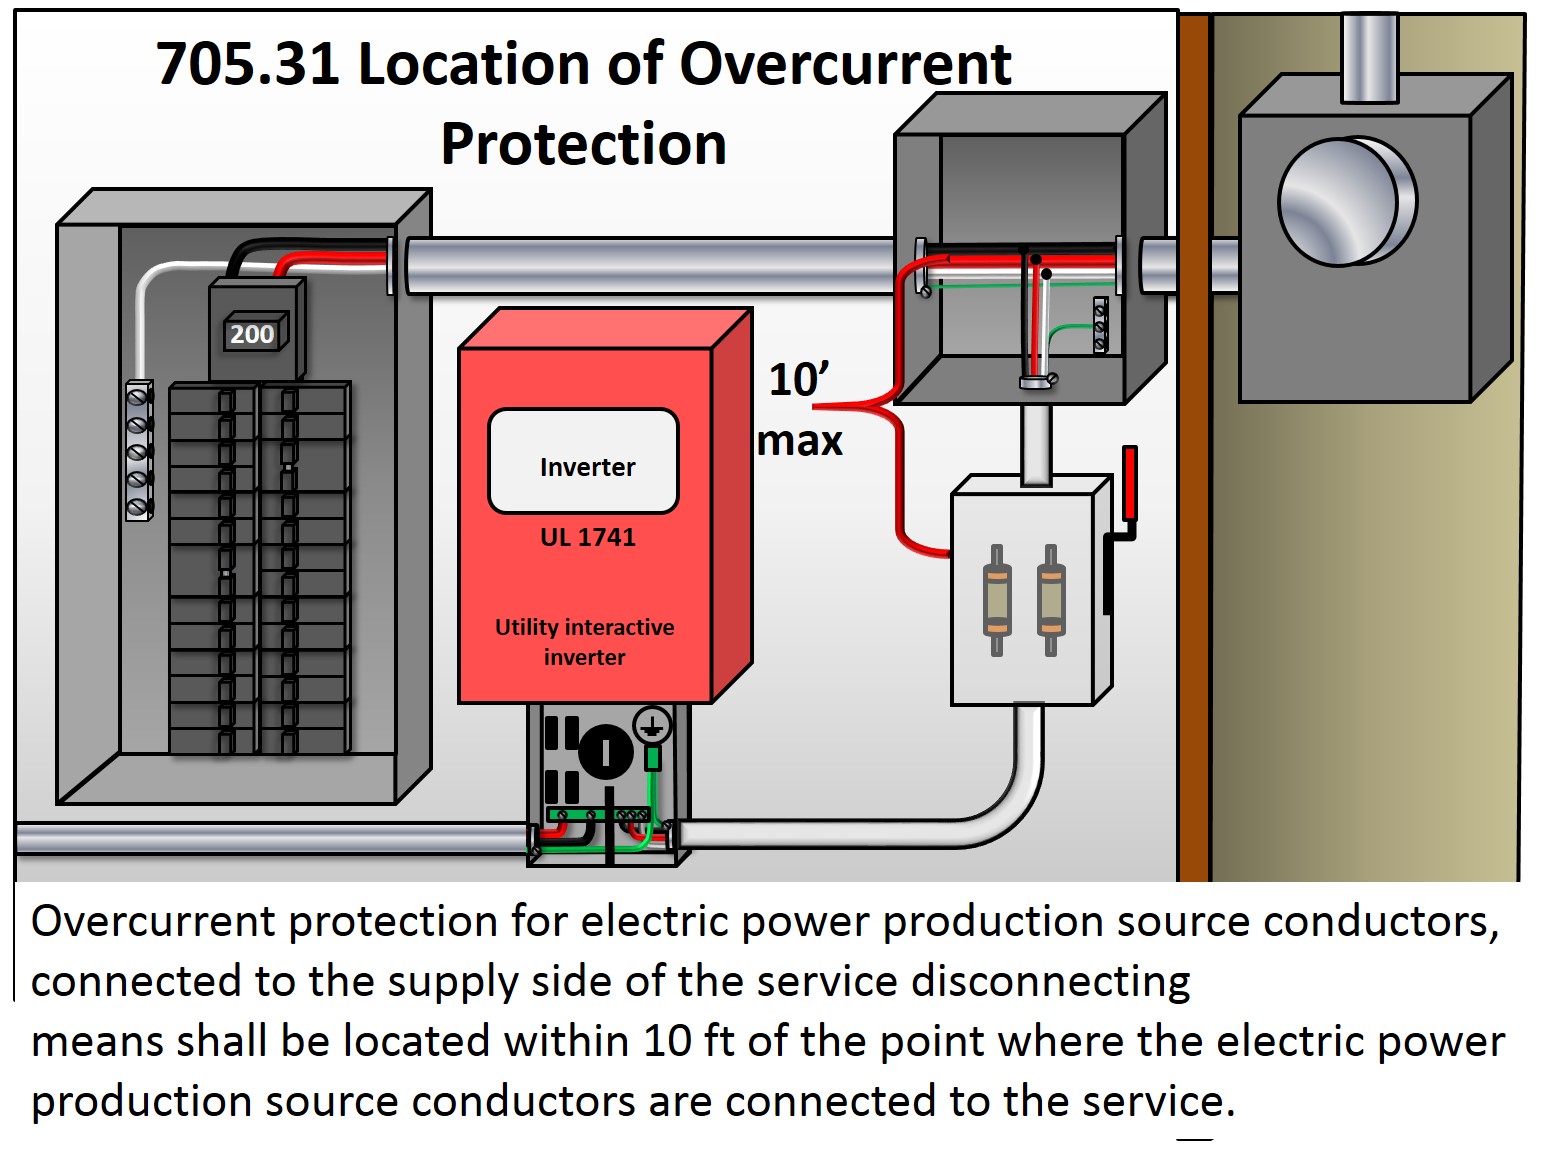 705.31 Location of Overcurrent Protection